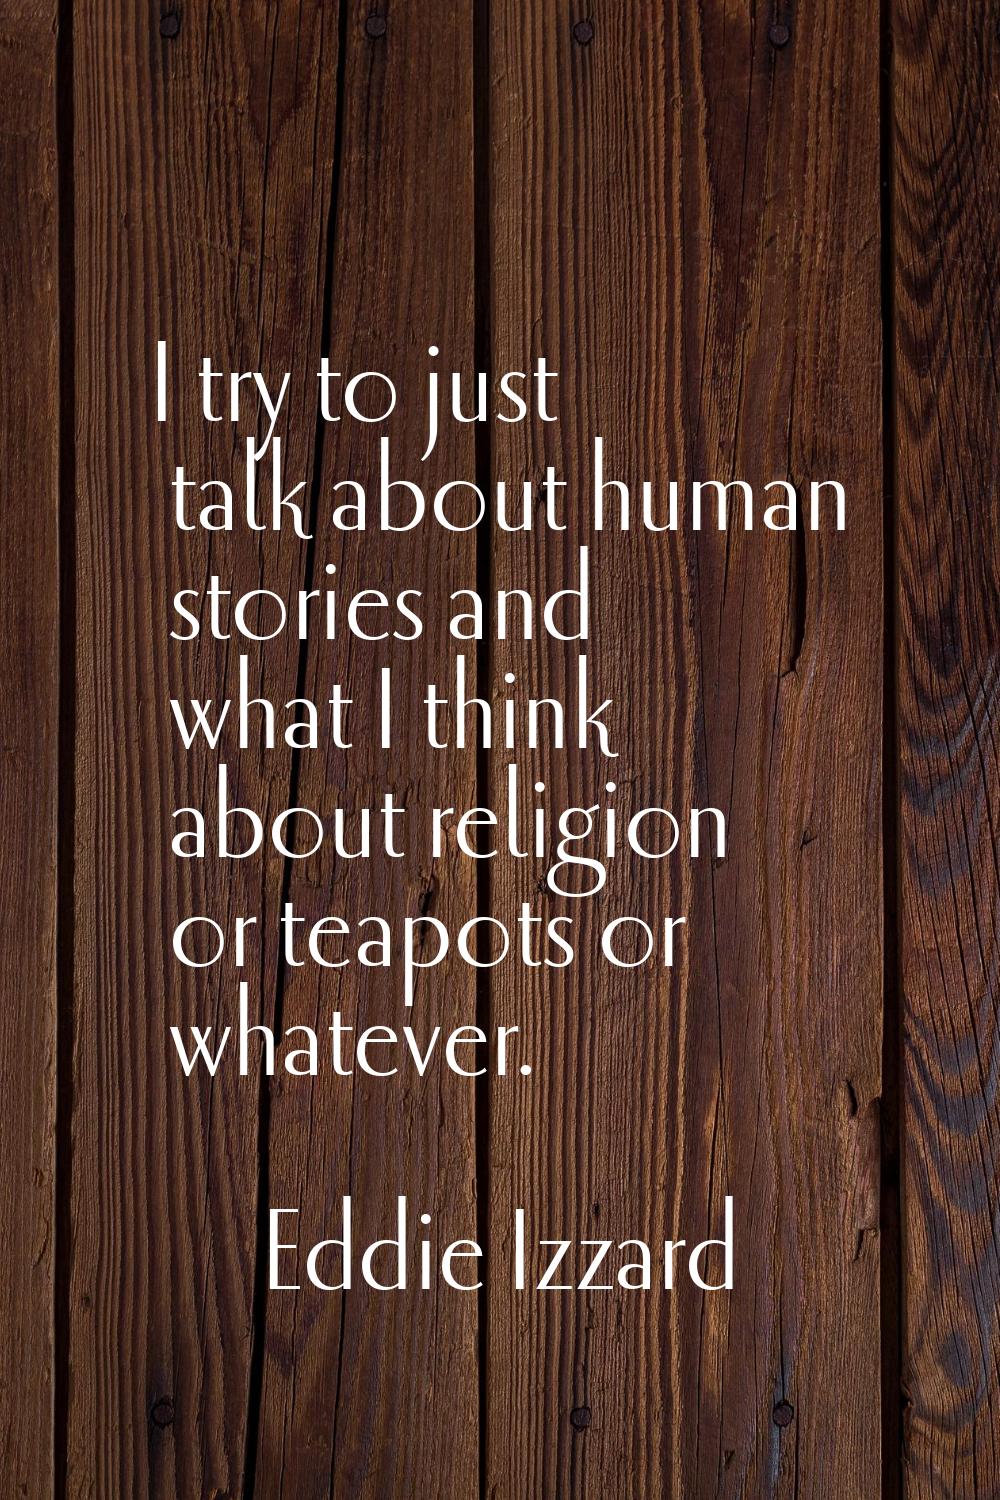 I try to just talk about human stories and what I think about religion or teapots or whatever.